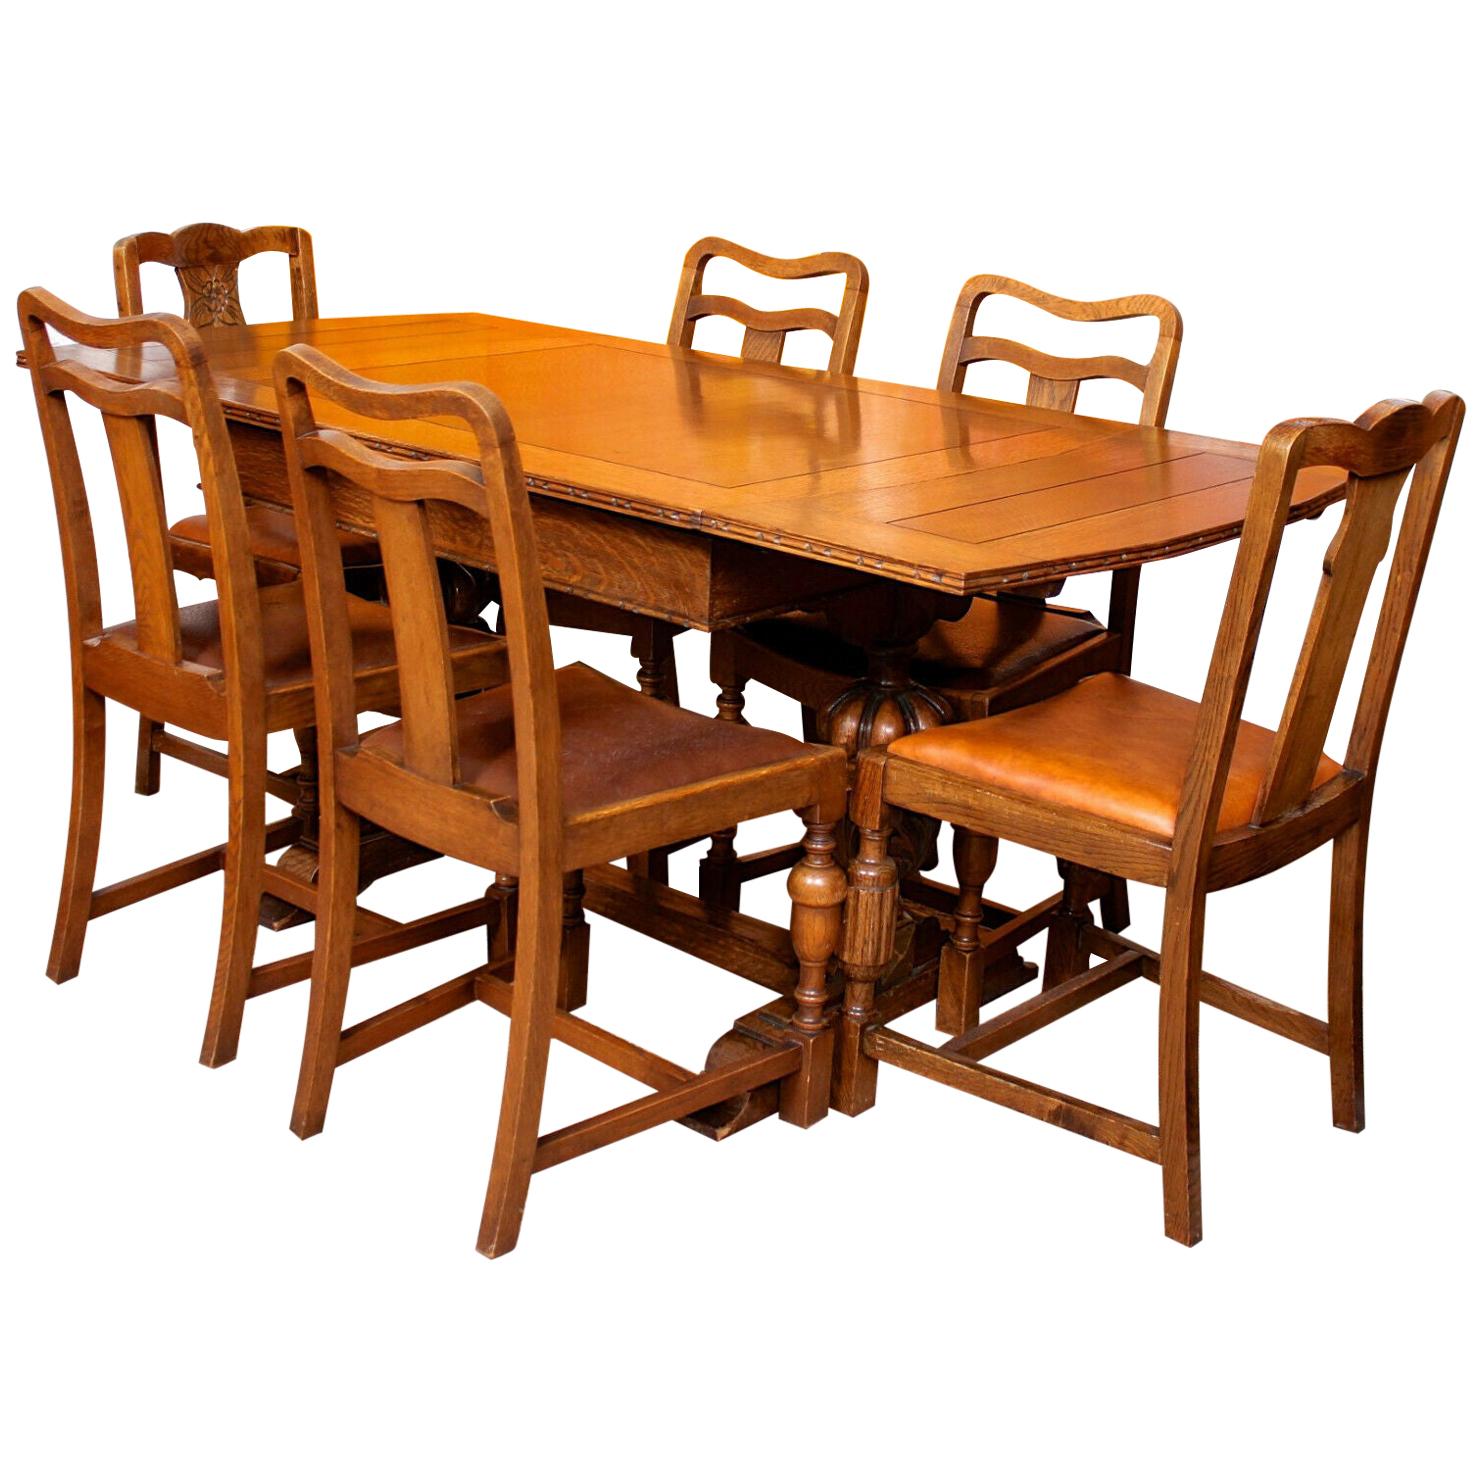 English Oak Dining Table and 6 Chairs Country Arts & Crafts